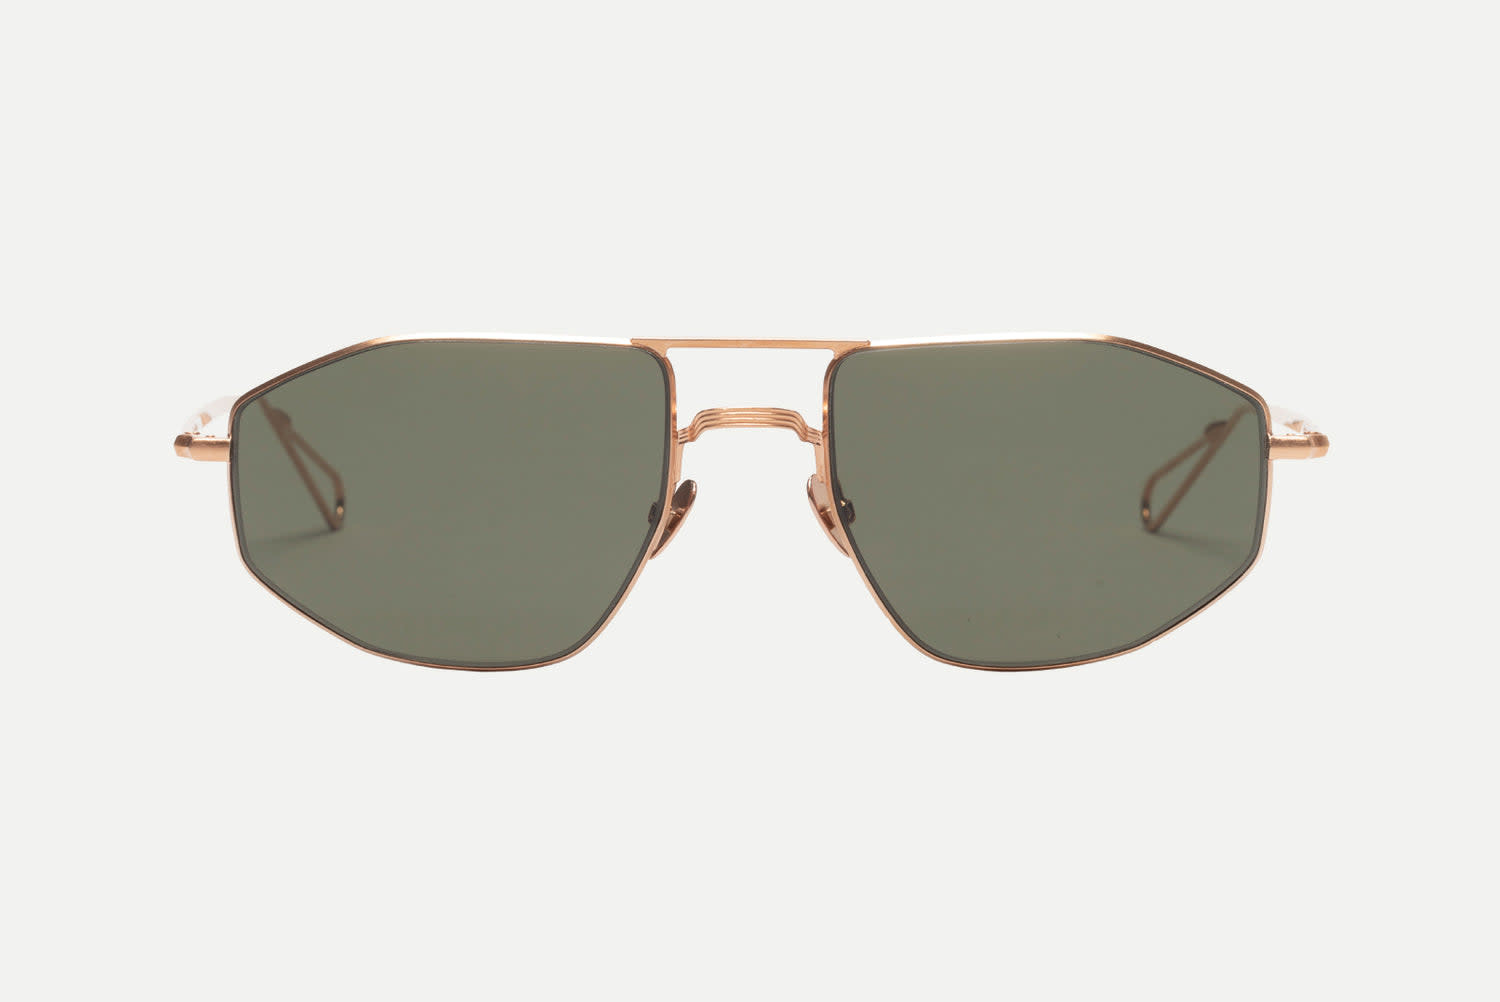 AHLEM - Quai d'Orsay - Rose Gold Brushed Green Lens - Handcrafted in France-1